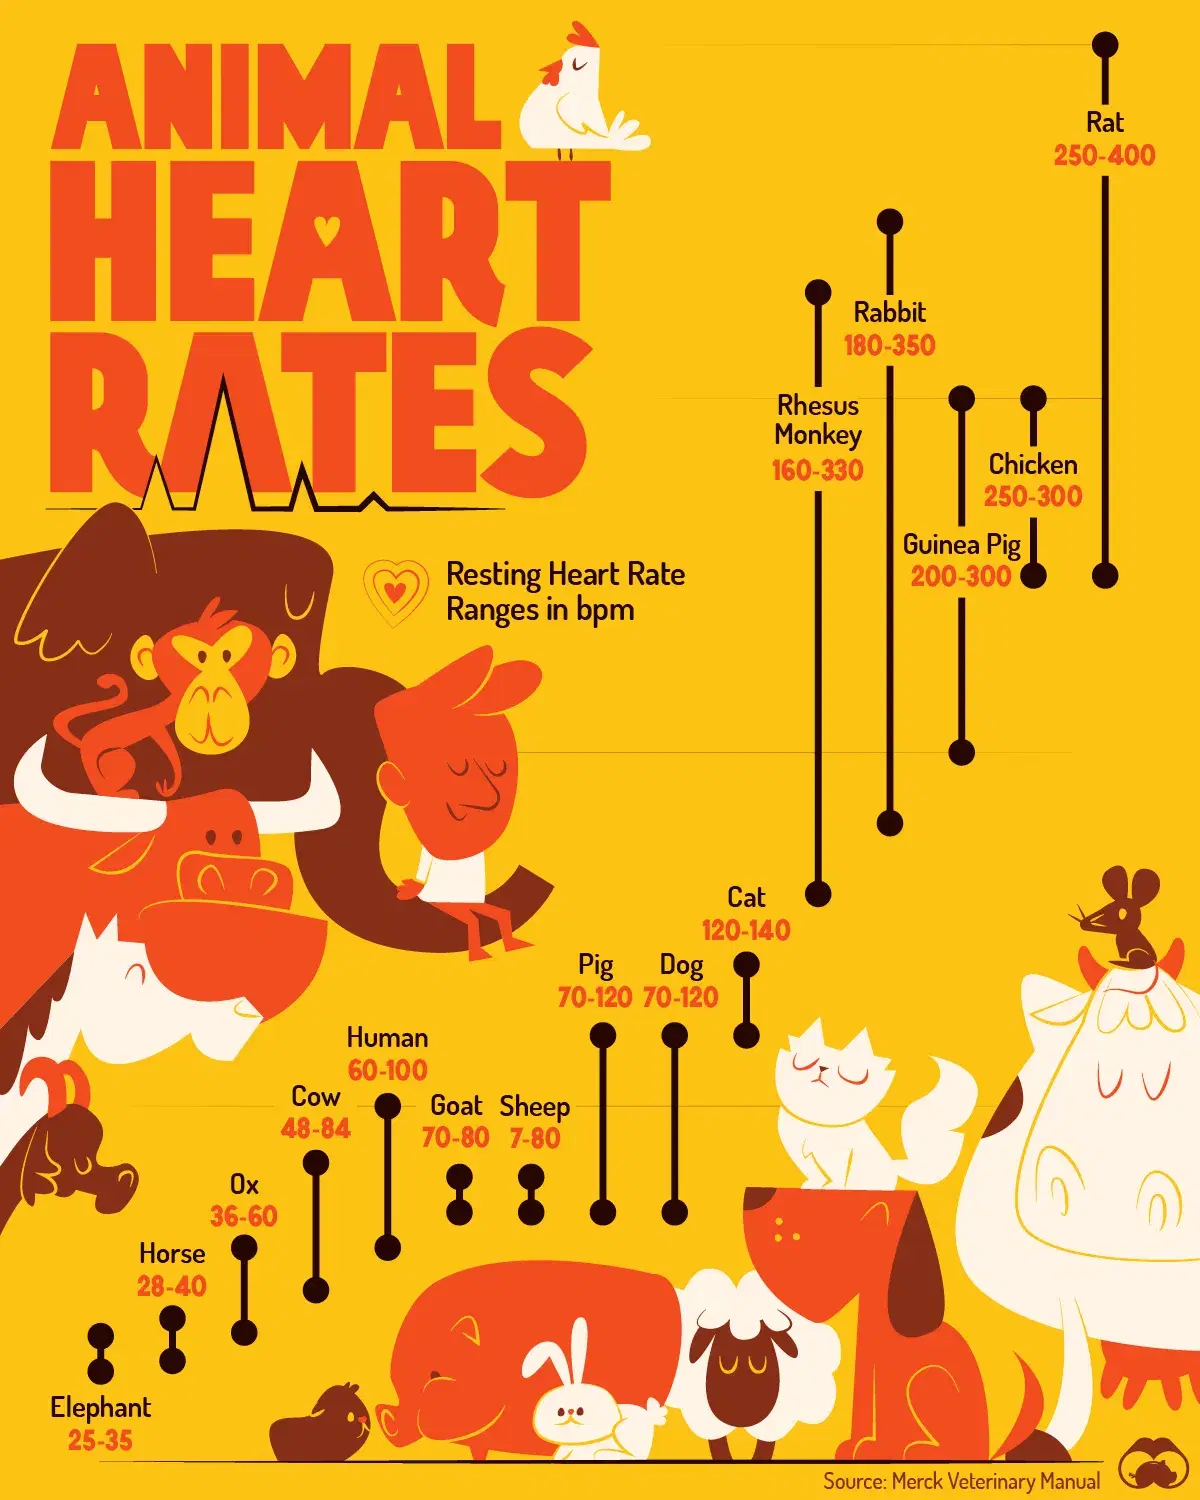 Small Animals Have Higher Resting Heart Rates 🐁